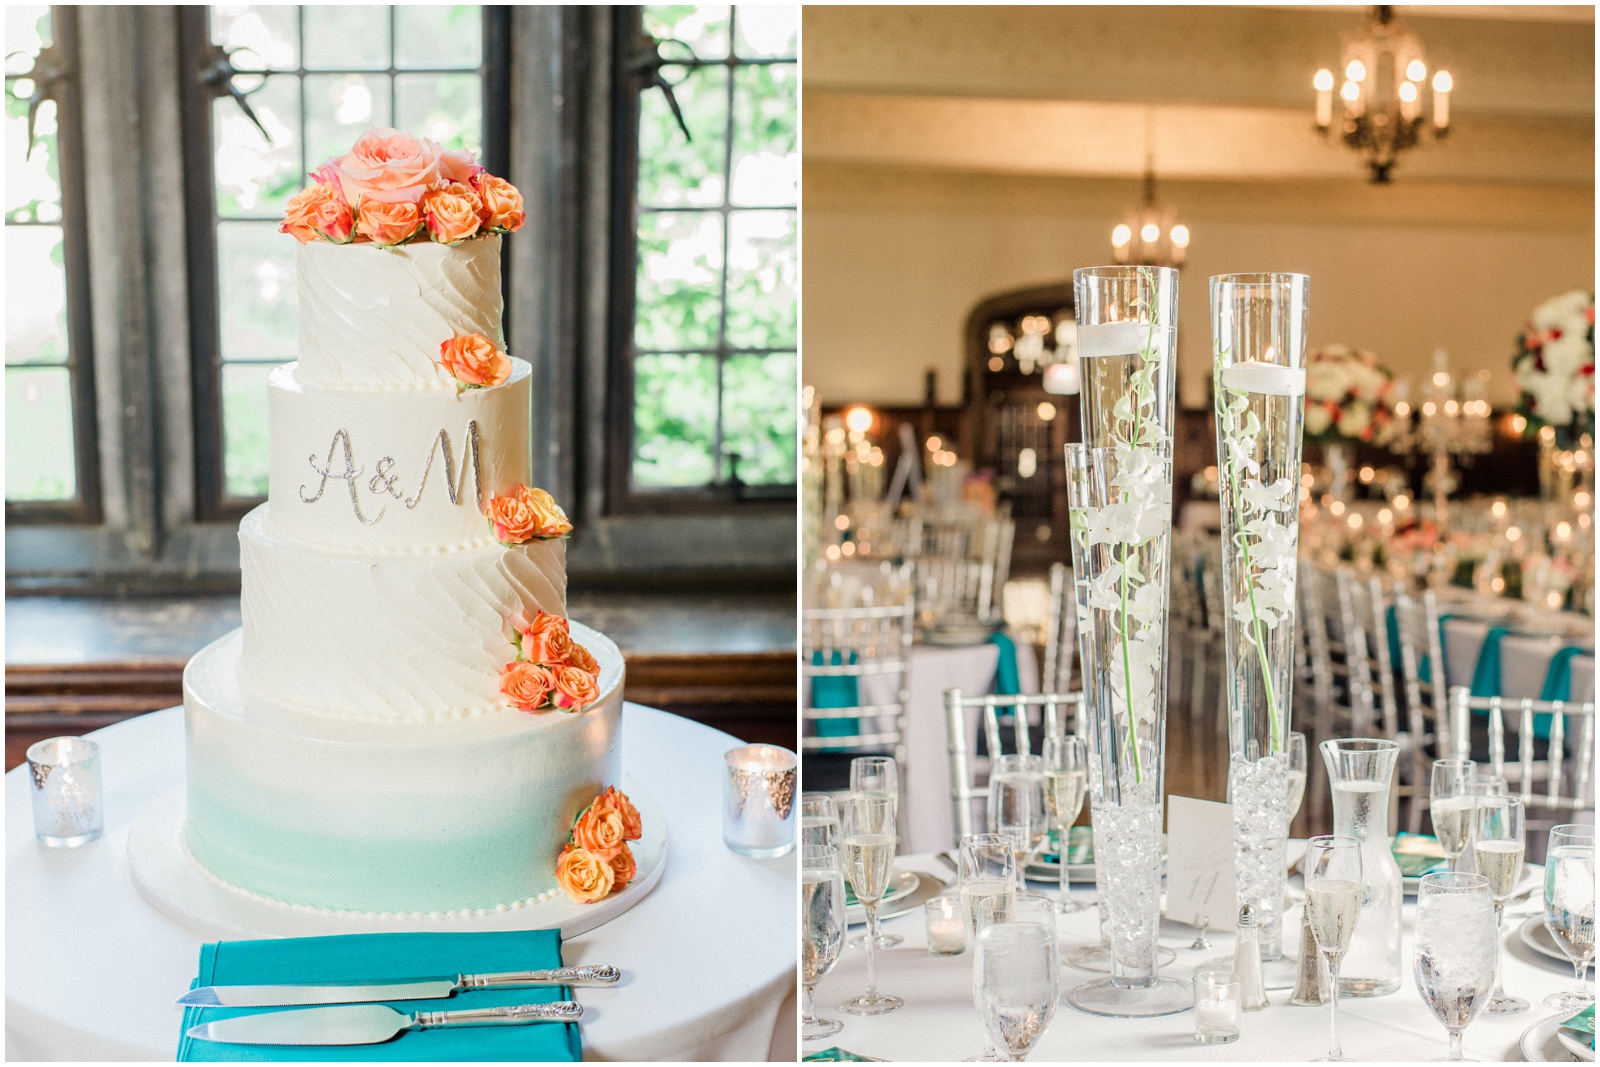 Coral and teal ombre wedding cake